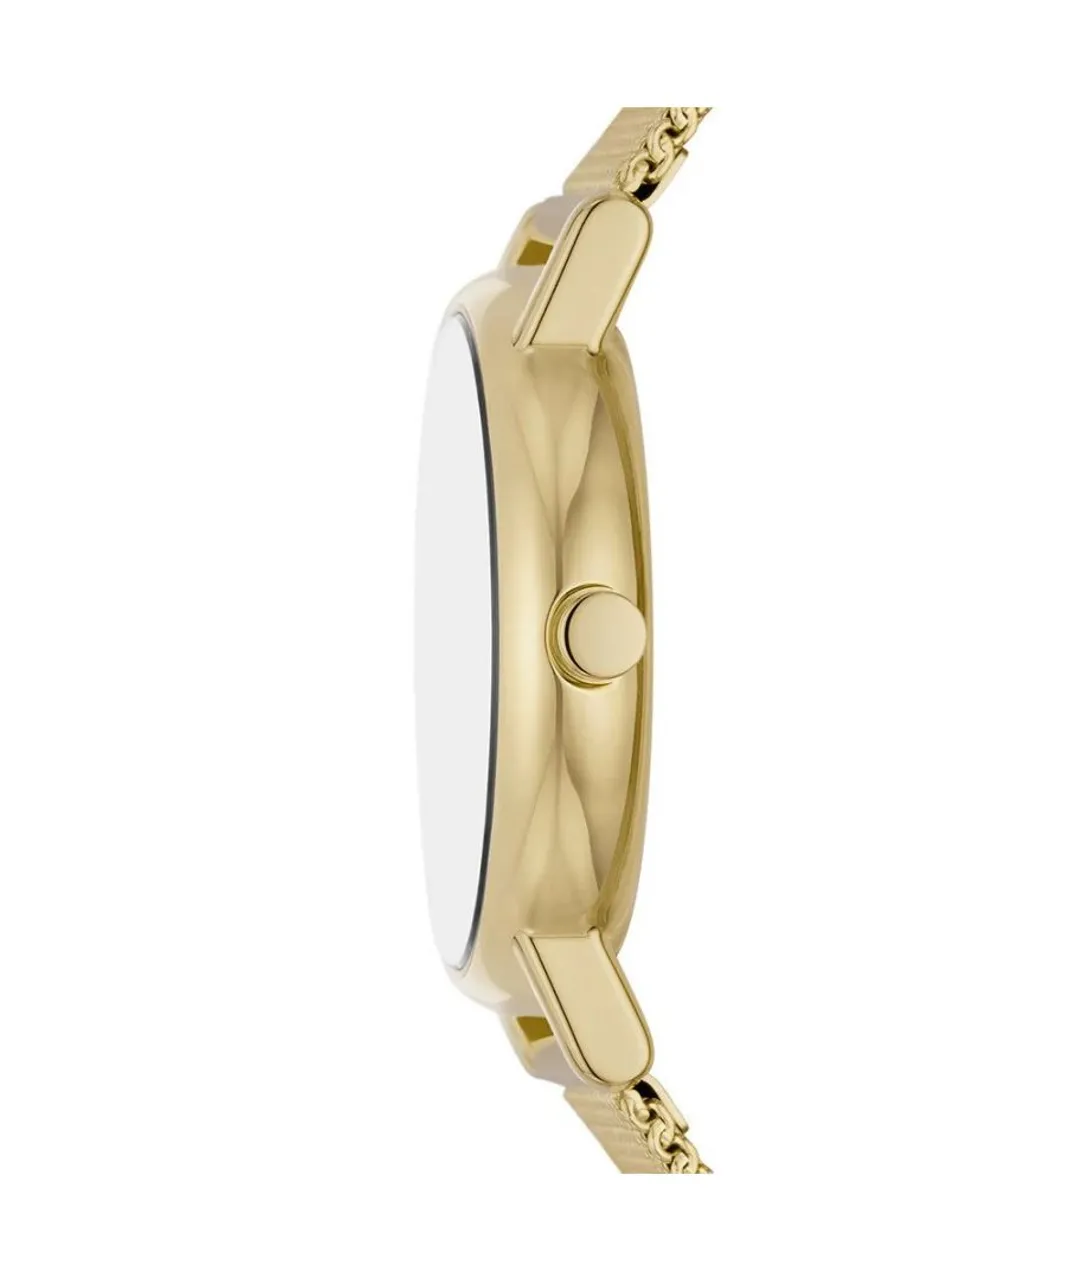 Skagen Signatur Lille WoMens Gold Watch SKW3111 Stainless Steel (archived) - One Size